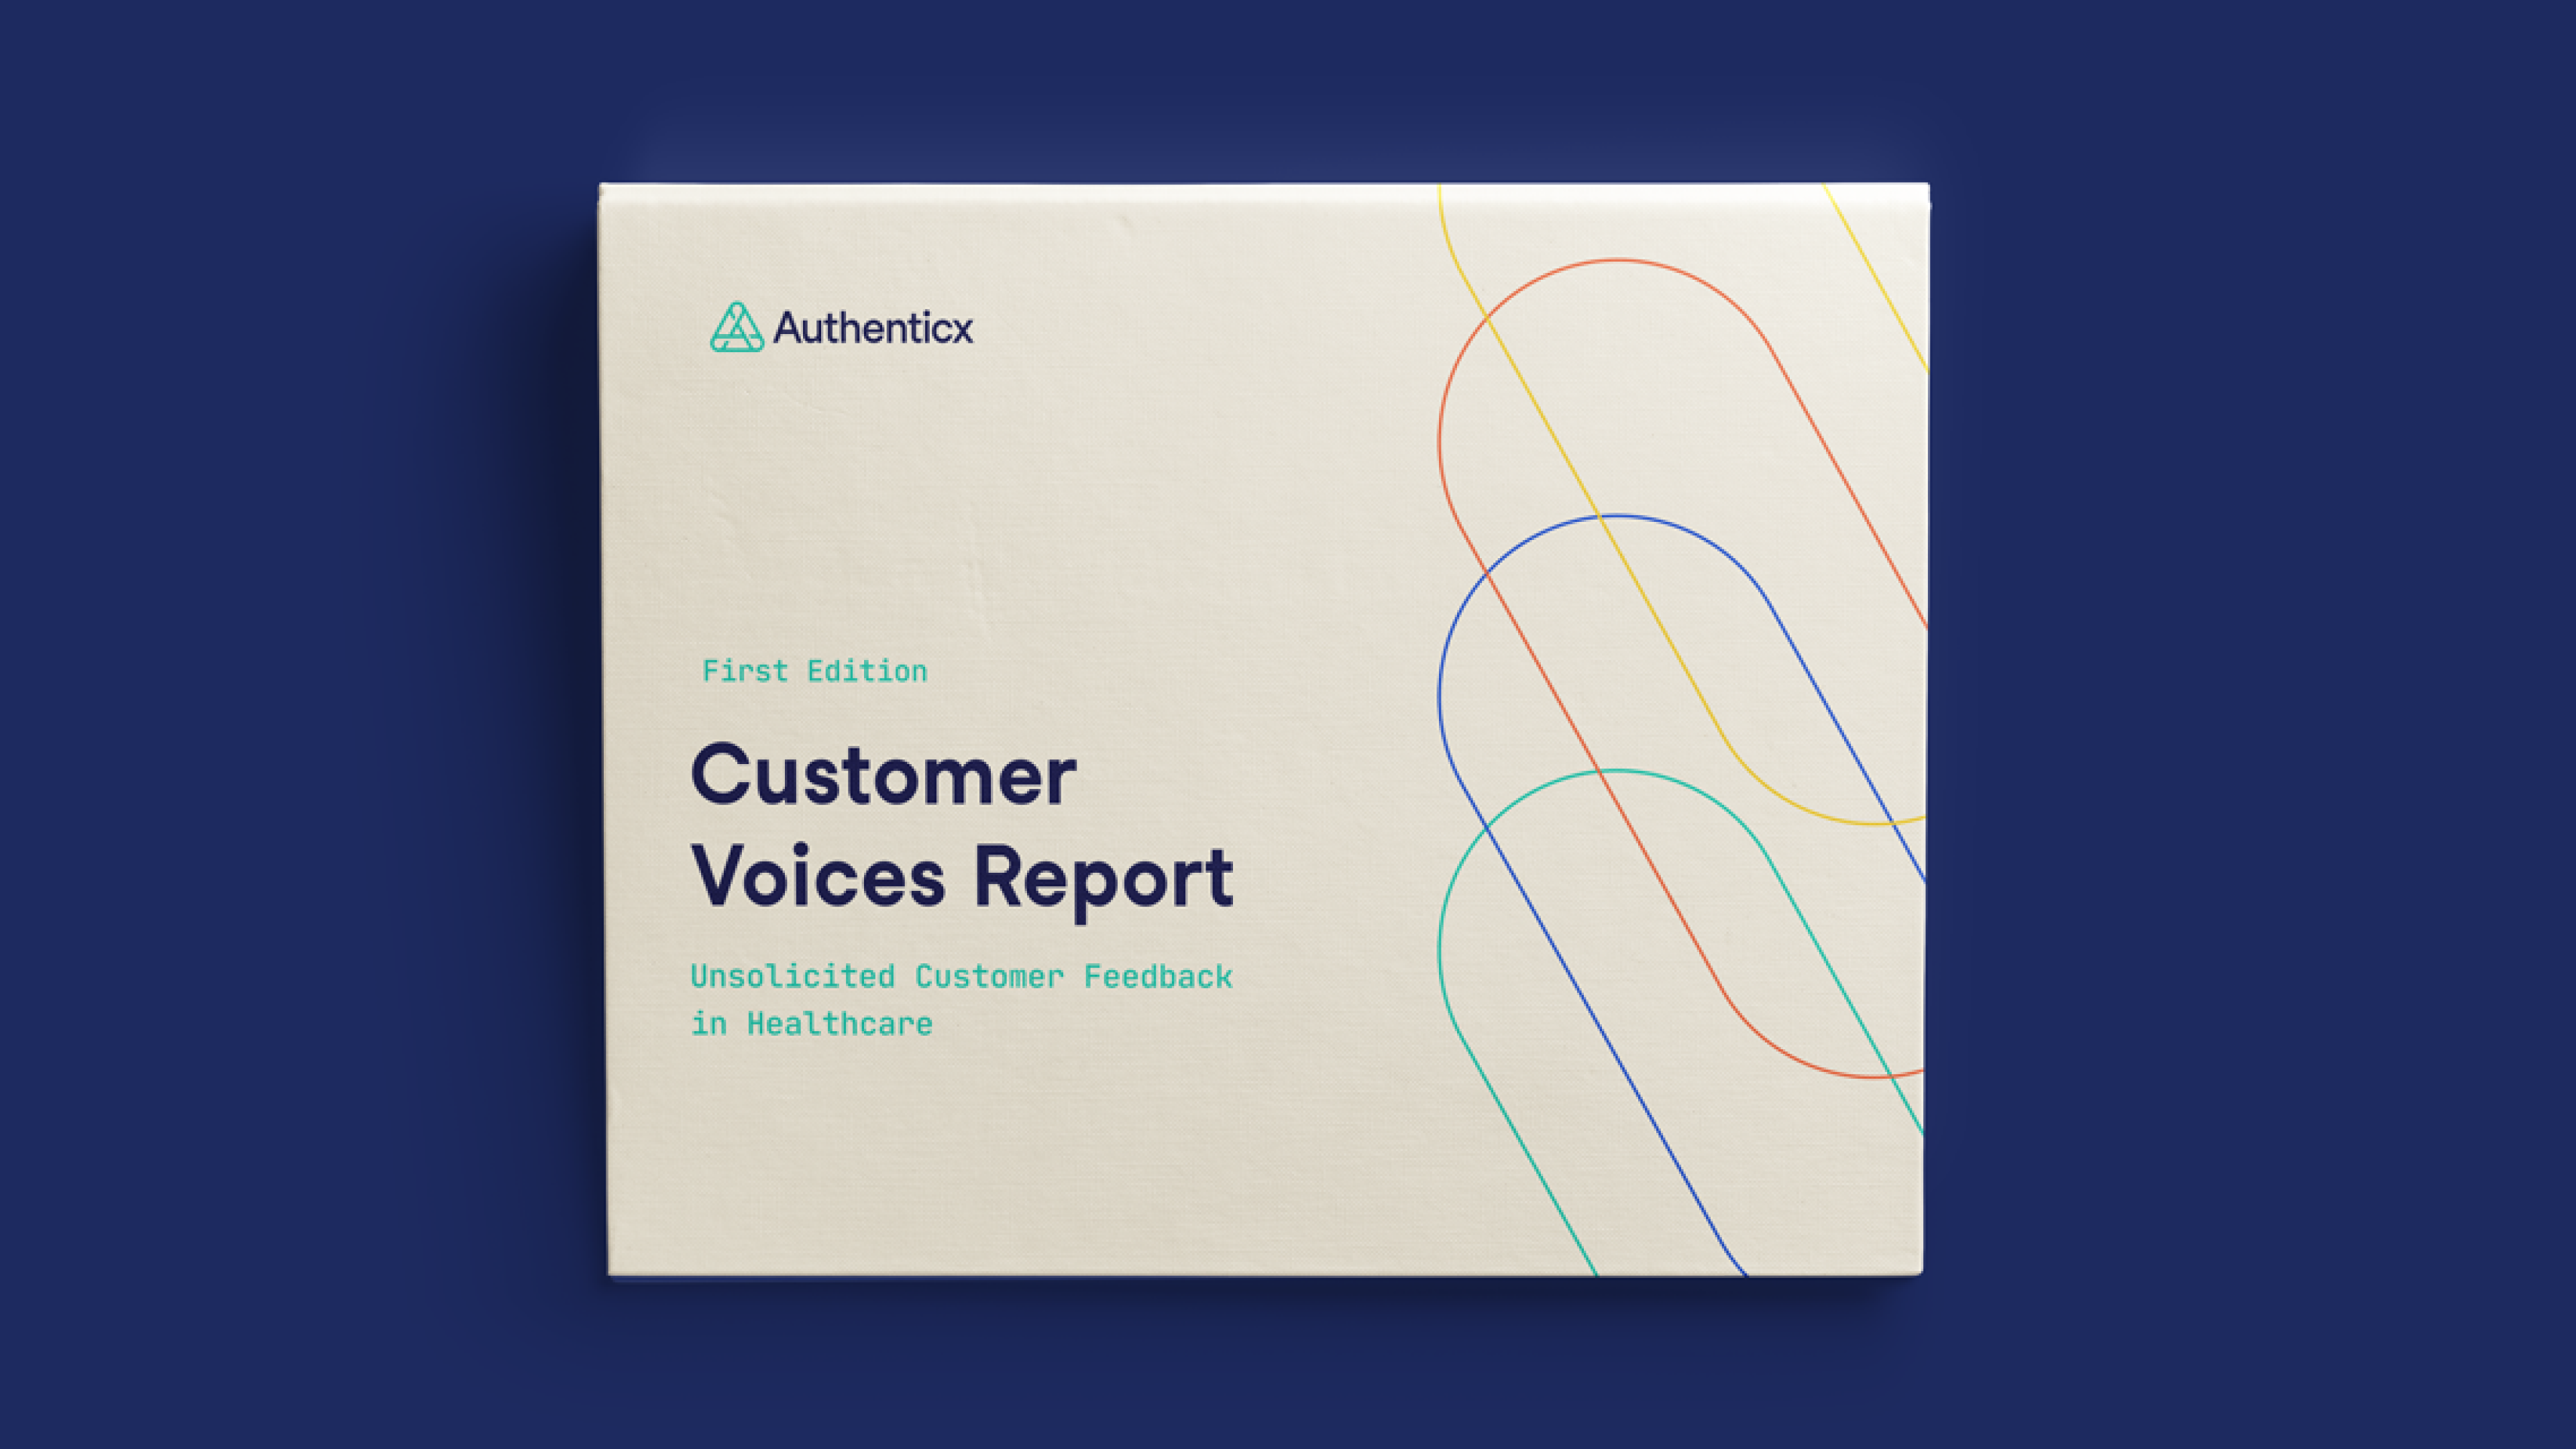 Unsoolicited Customer Feedback | Customer Voices Report First Edition | Authenticx